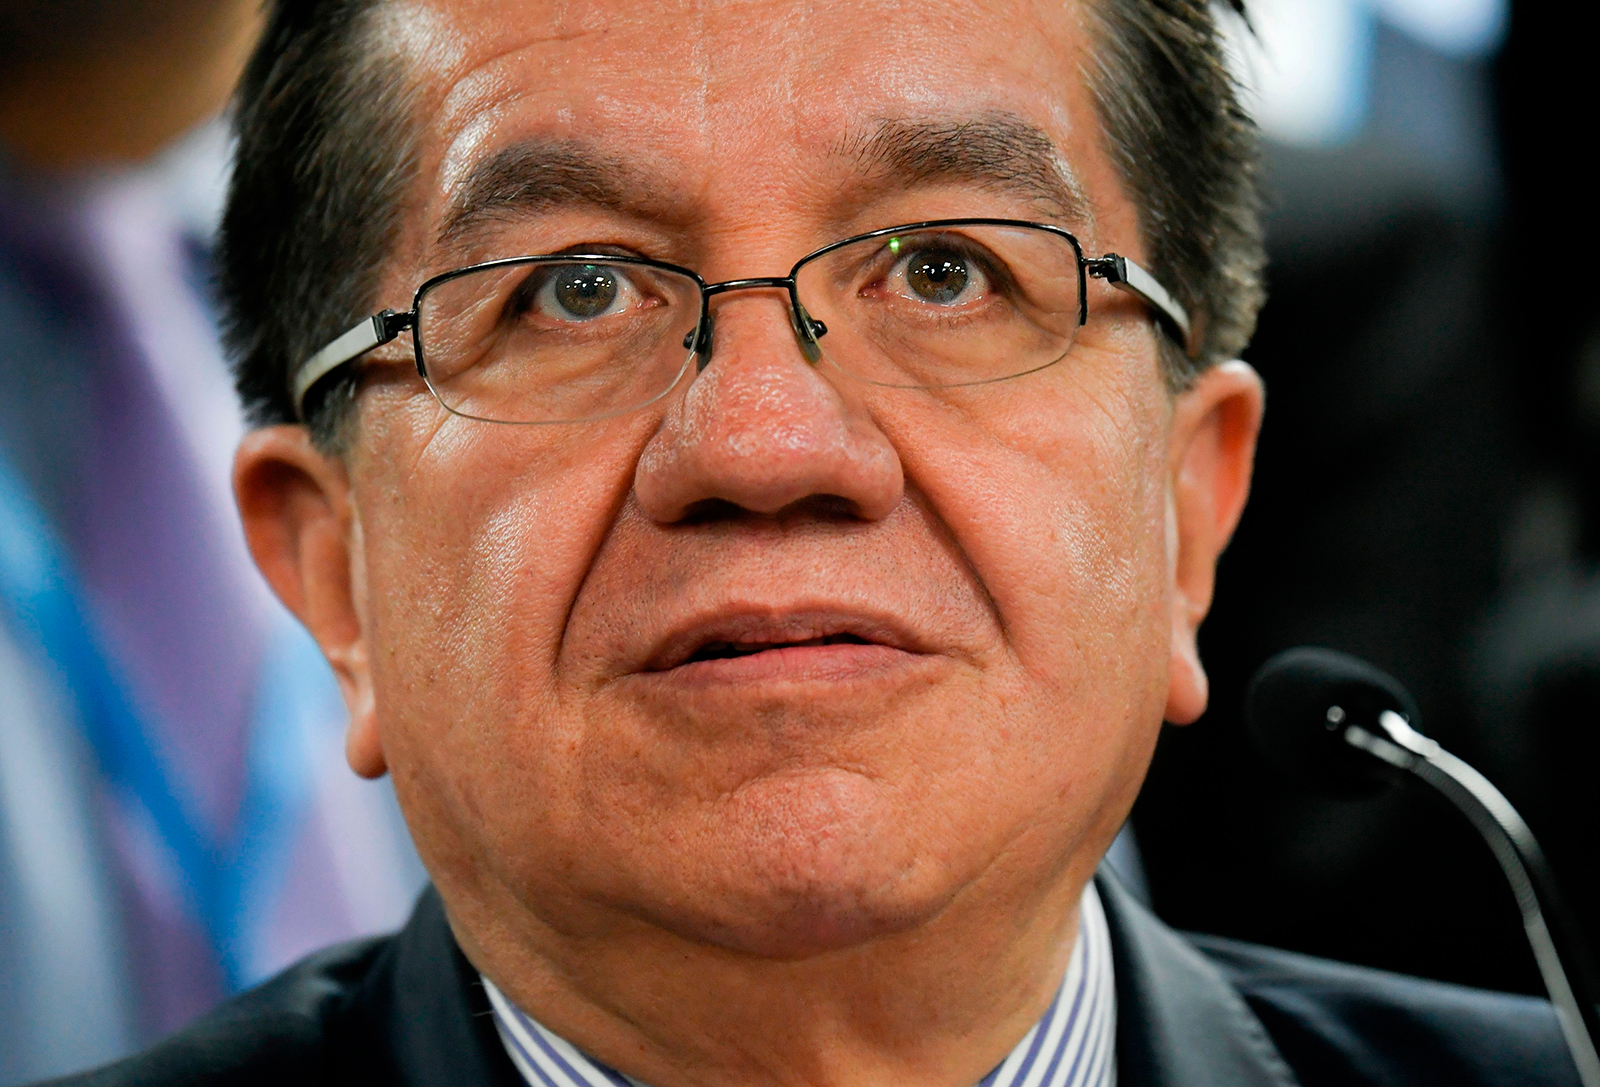 Colombian Health Minister Fernando Ruiz seen during a news conference in Bogota, Colombia, on March 4.